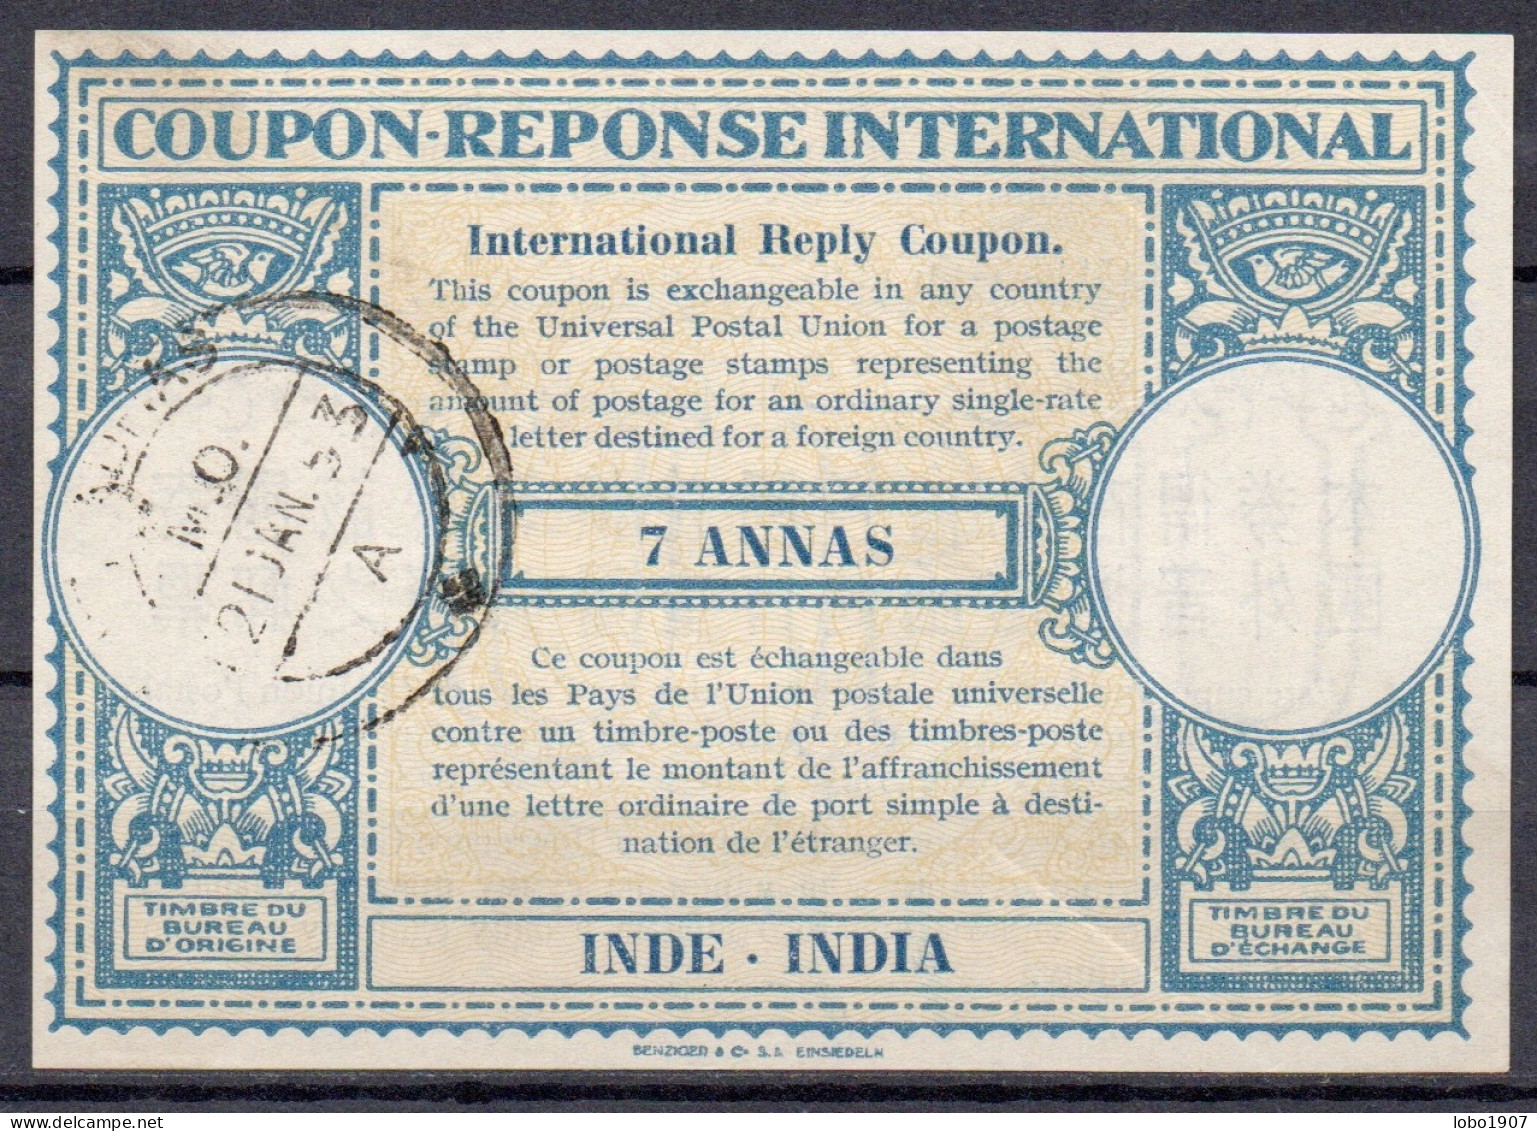 INDES INDIA 1953,  Lo15  7 ANNAS  International Reply Coupon Reponse Antwortschein IRC IAS  O MADRAS 21.01.53 - Unclassified